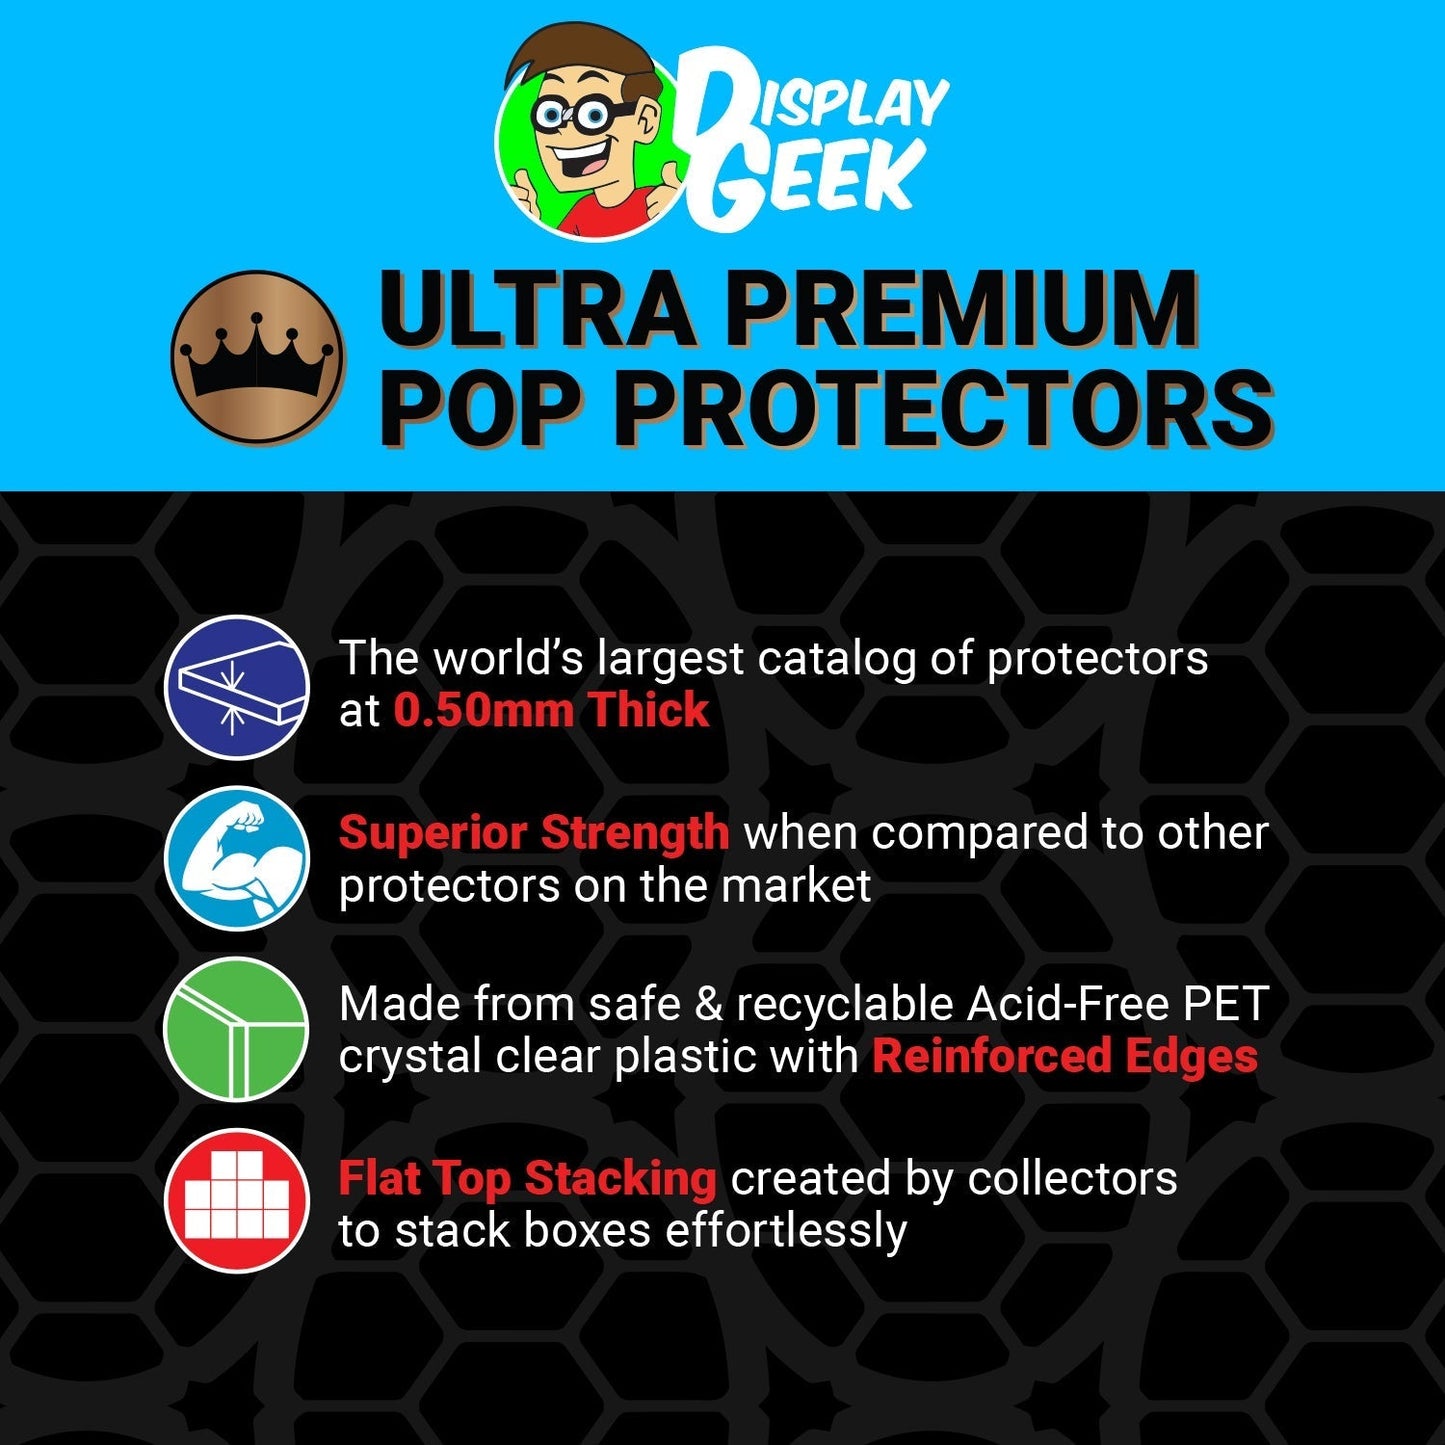 Pop Protector for Atom Ant Funko Pop Pez - PPG Pop Protector Guide Search Created by Display Geek